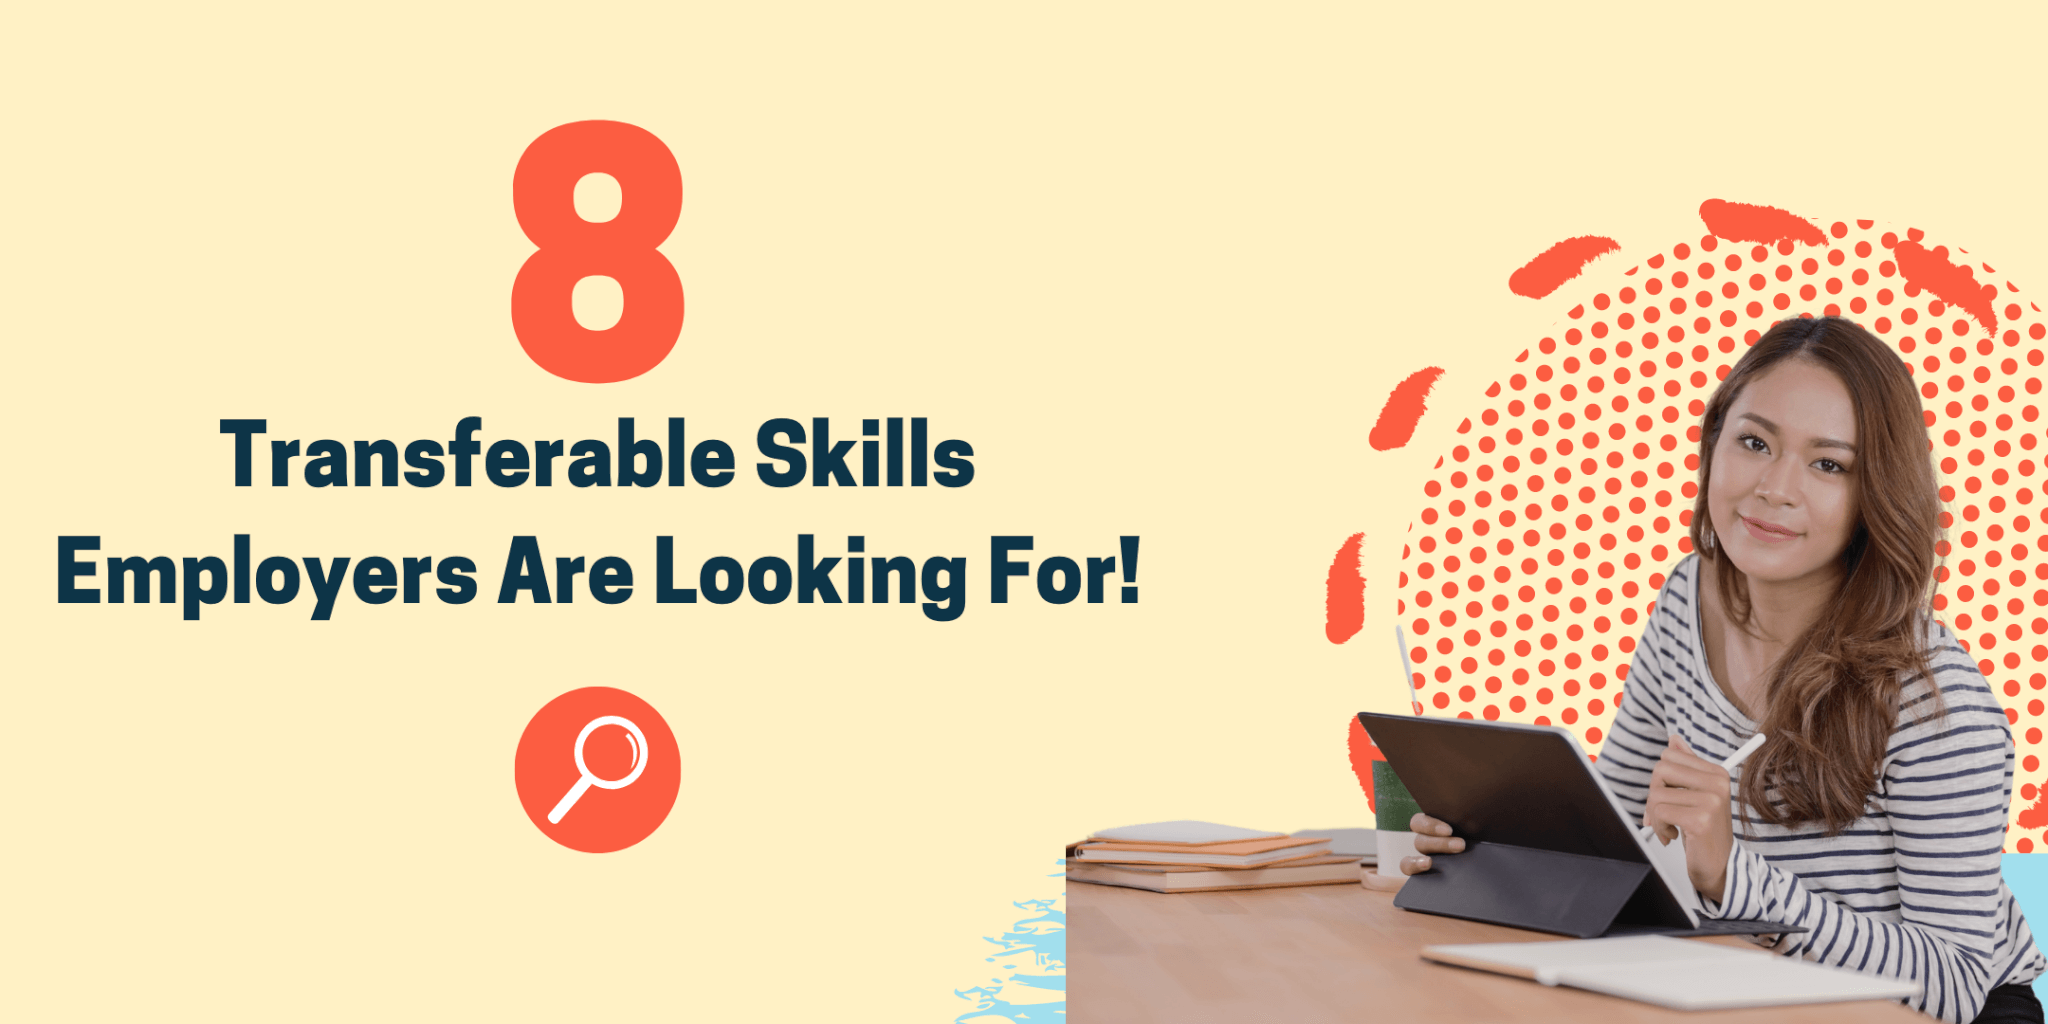 8 Transferable Skills that companies are looking for!